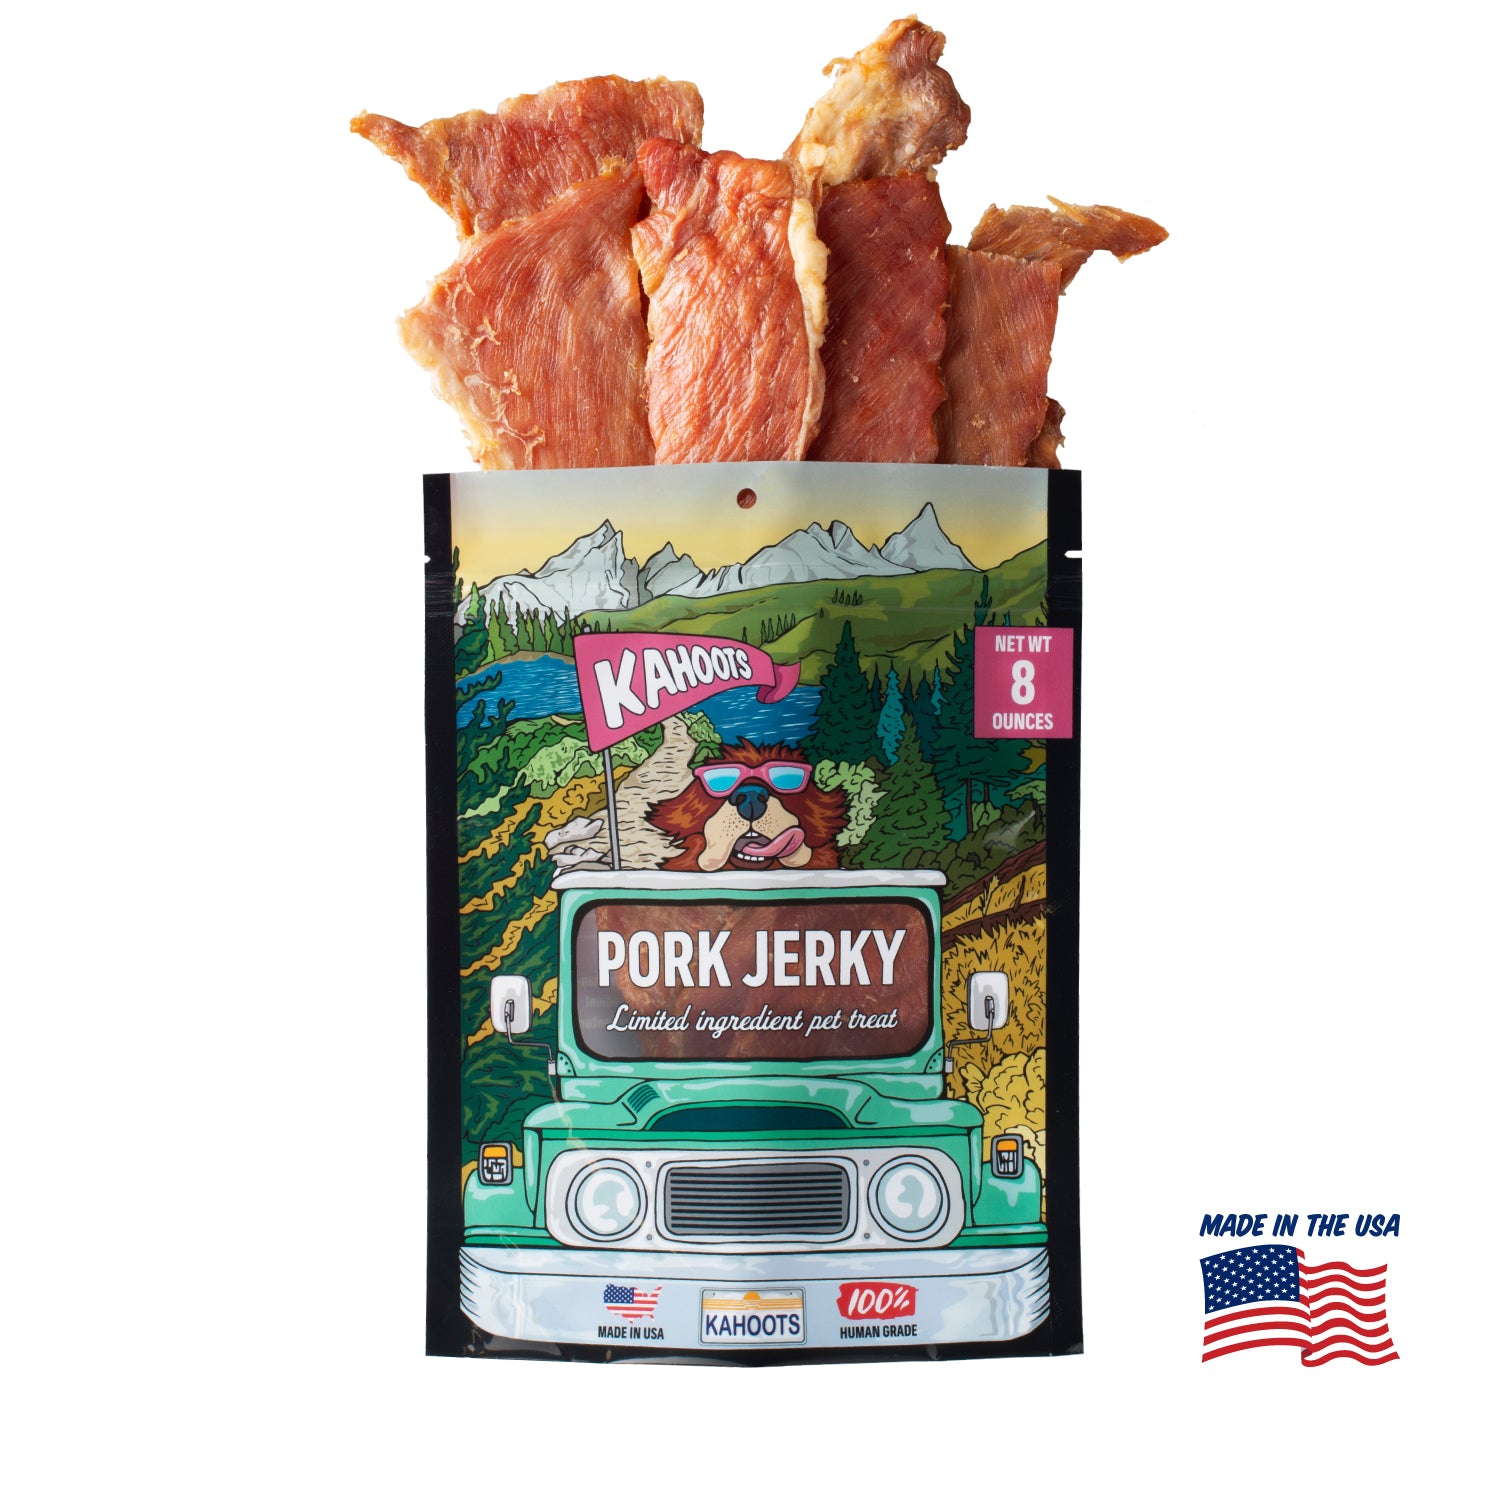 Kahoots pork chicken packaging. Made in the USA